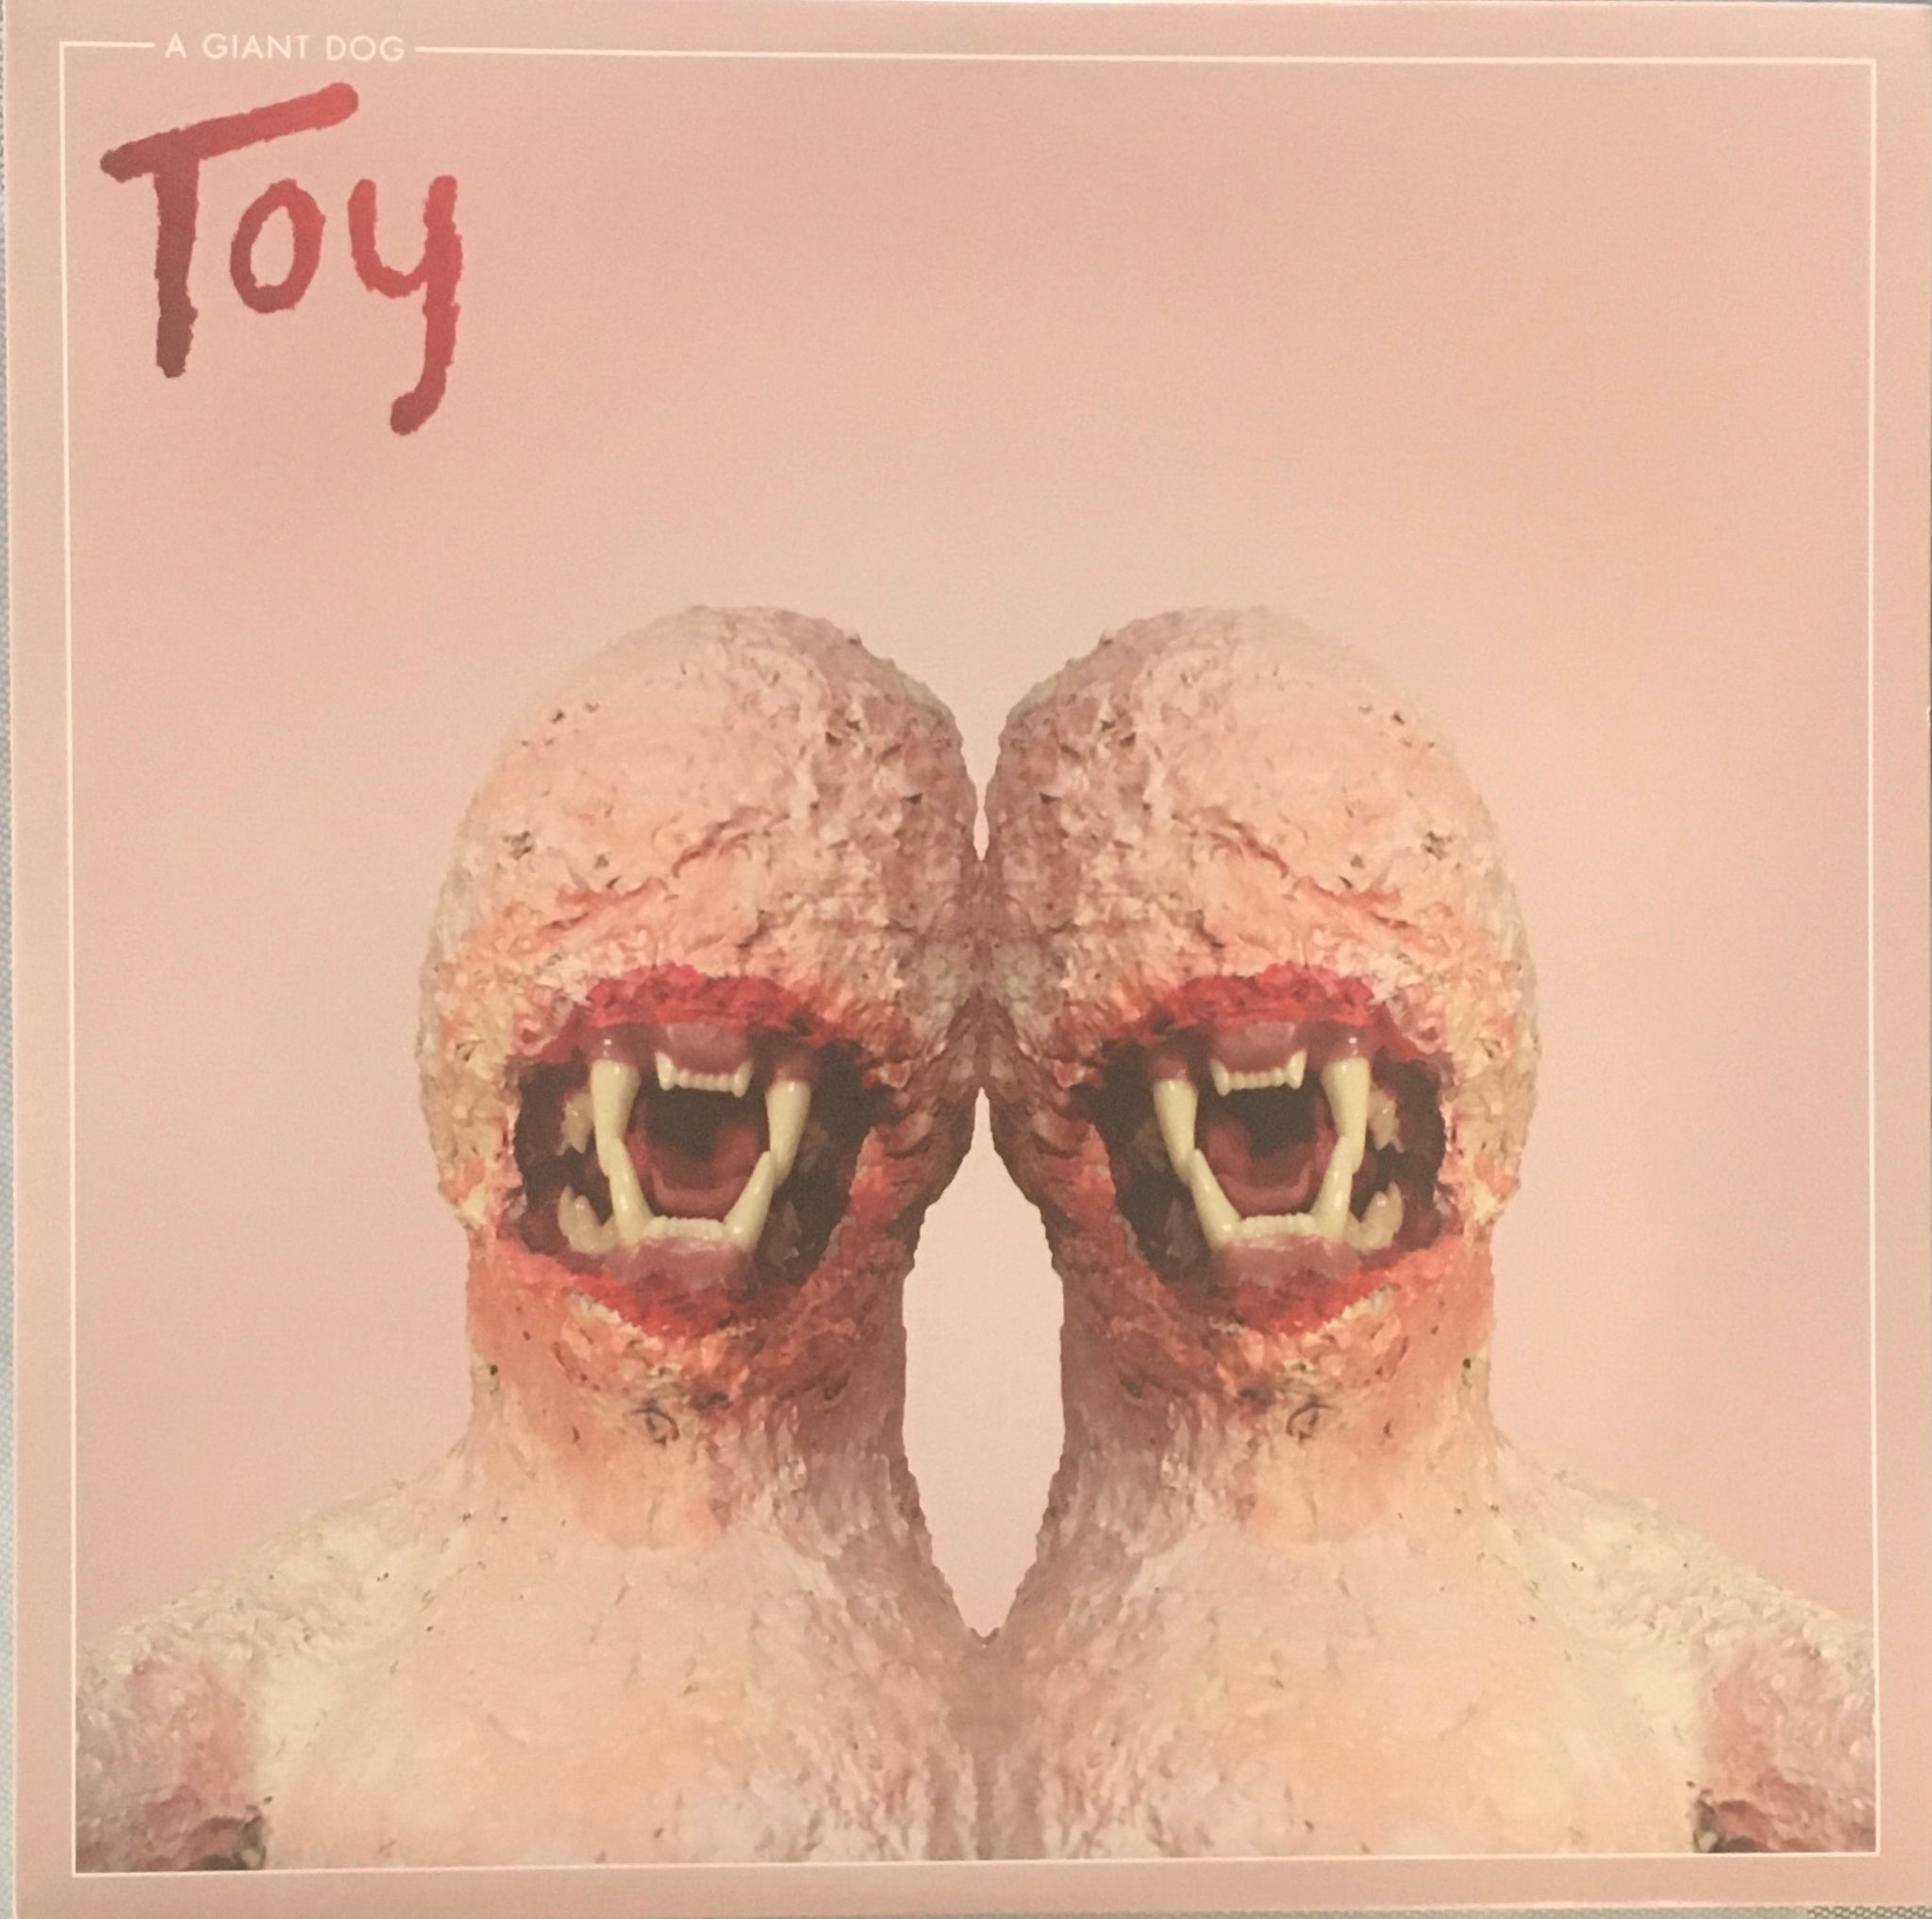 A Giant Dog "Toy" LP (2017)